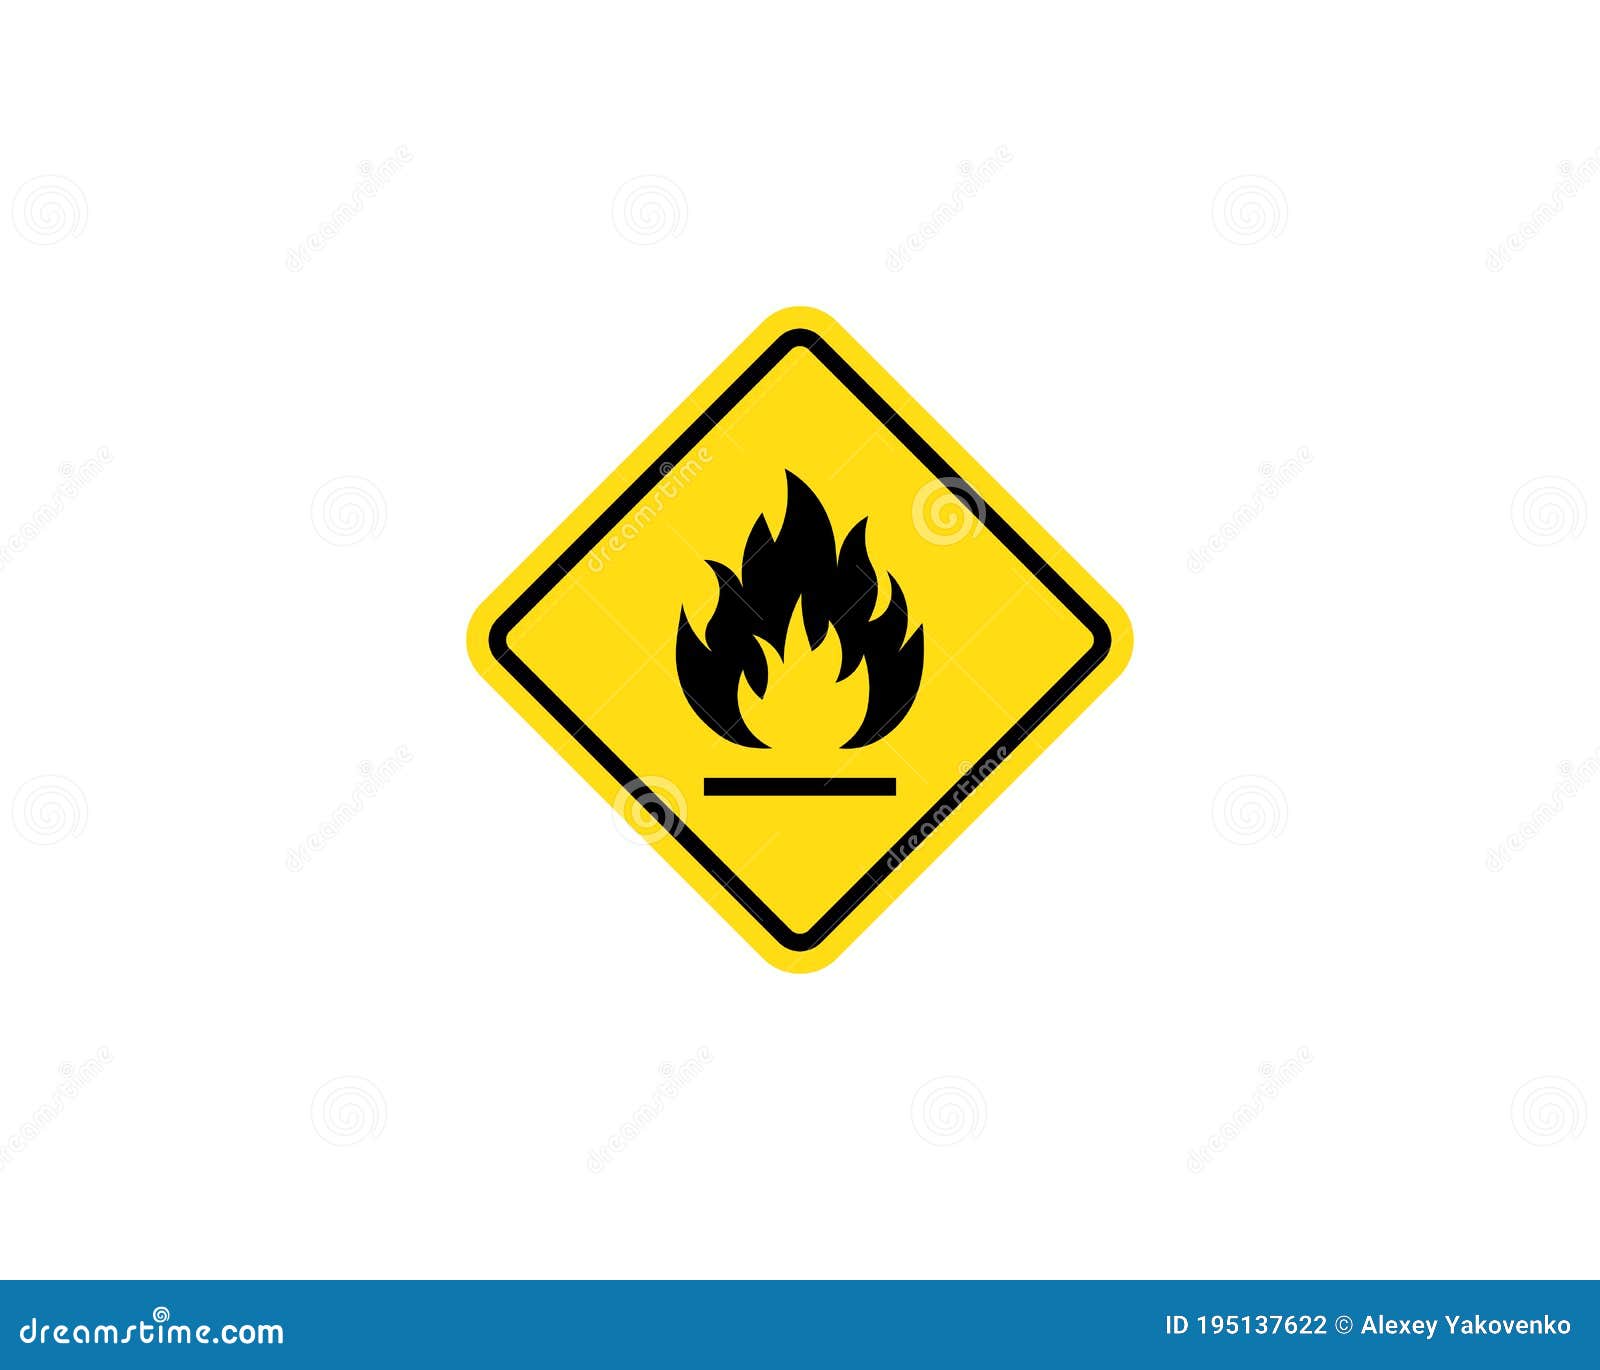 flammable materials warning sign. fire warning sign in yellow triangle. inflammable substances icon.  on  white